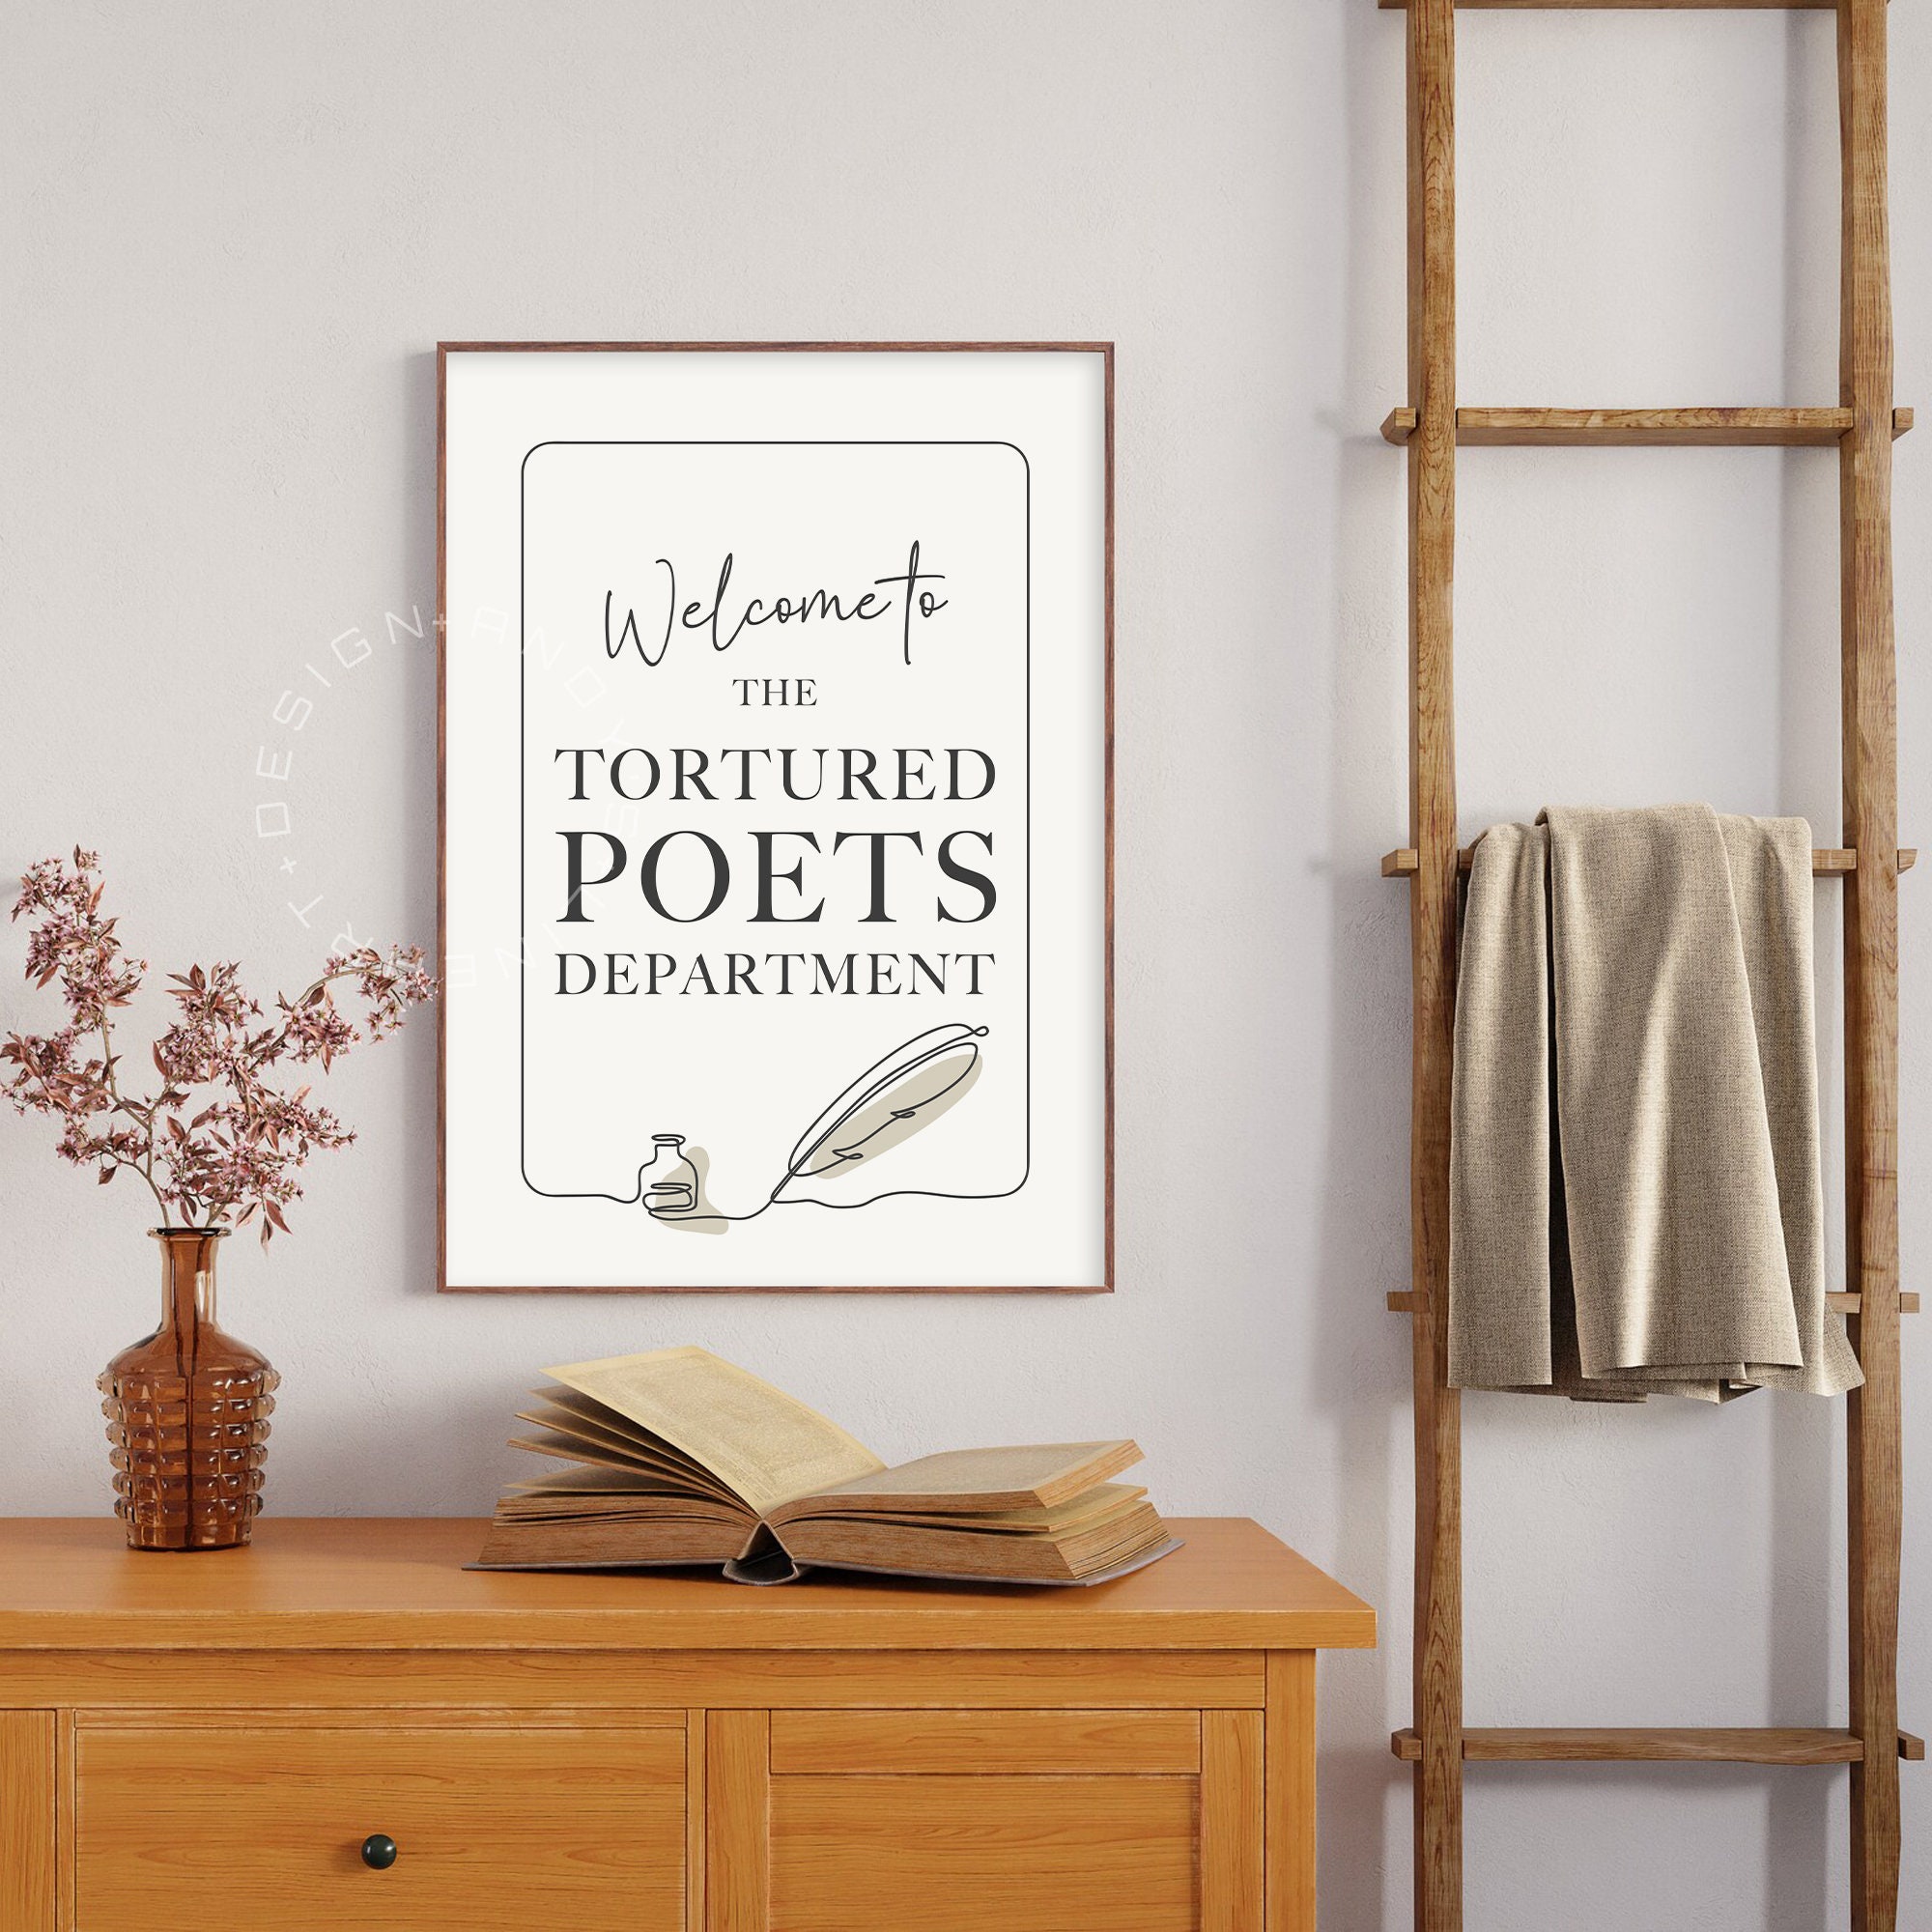 Discover The Tortured Poets Department Poster, TTPD Poster, Taylor New Album Poster